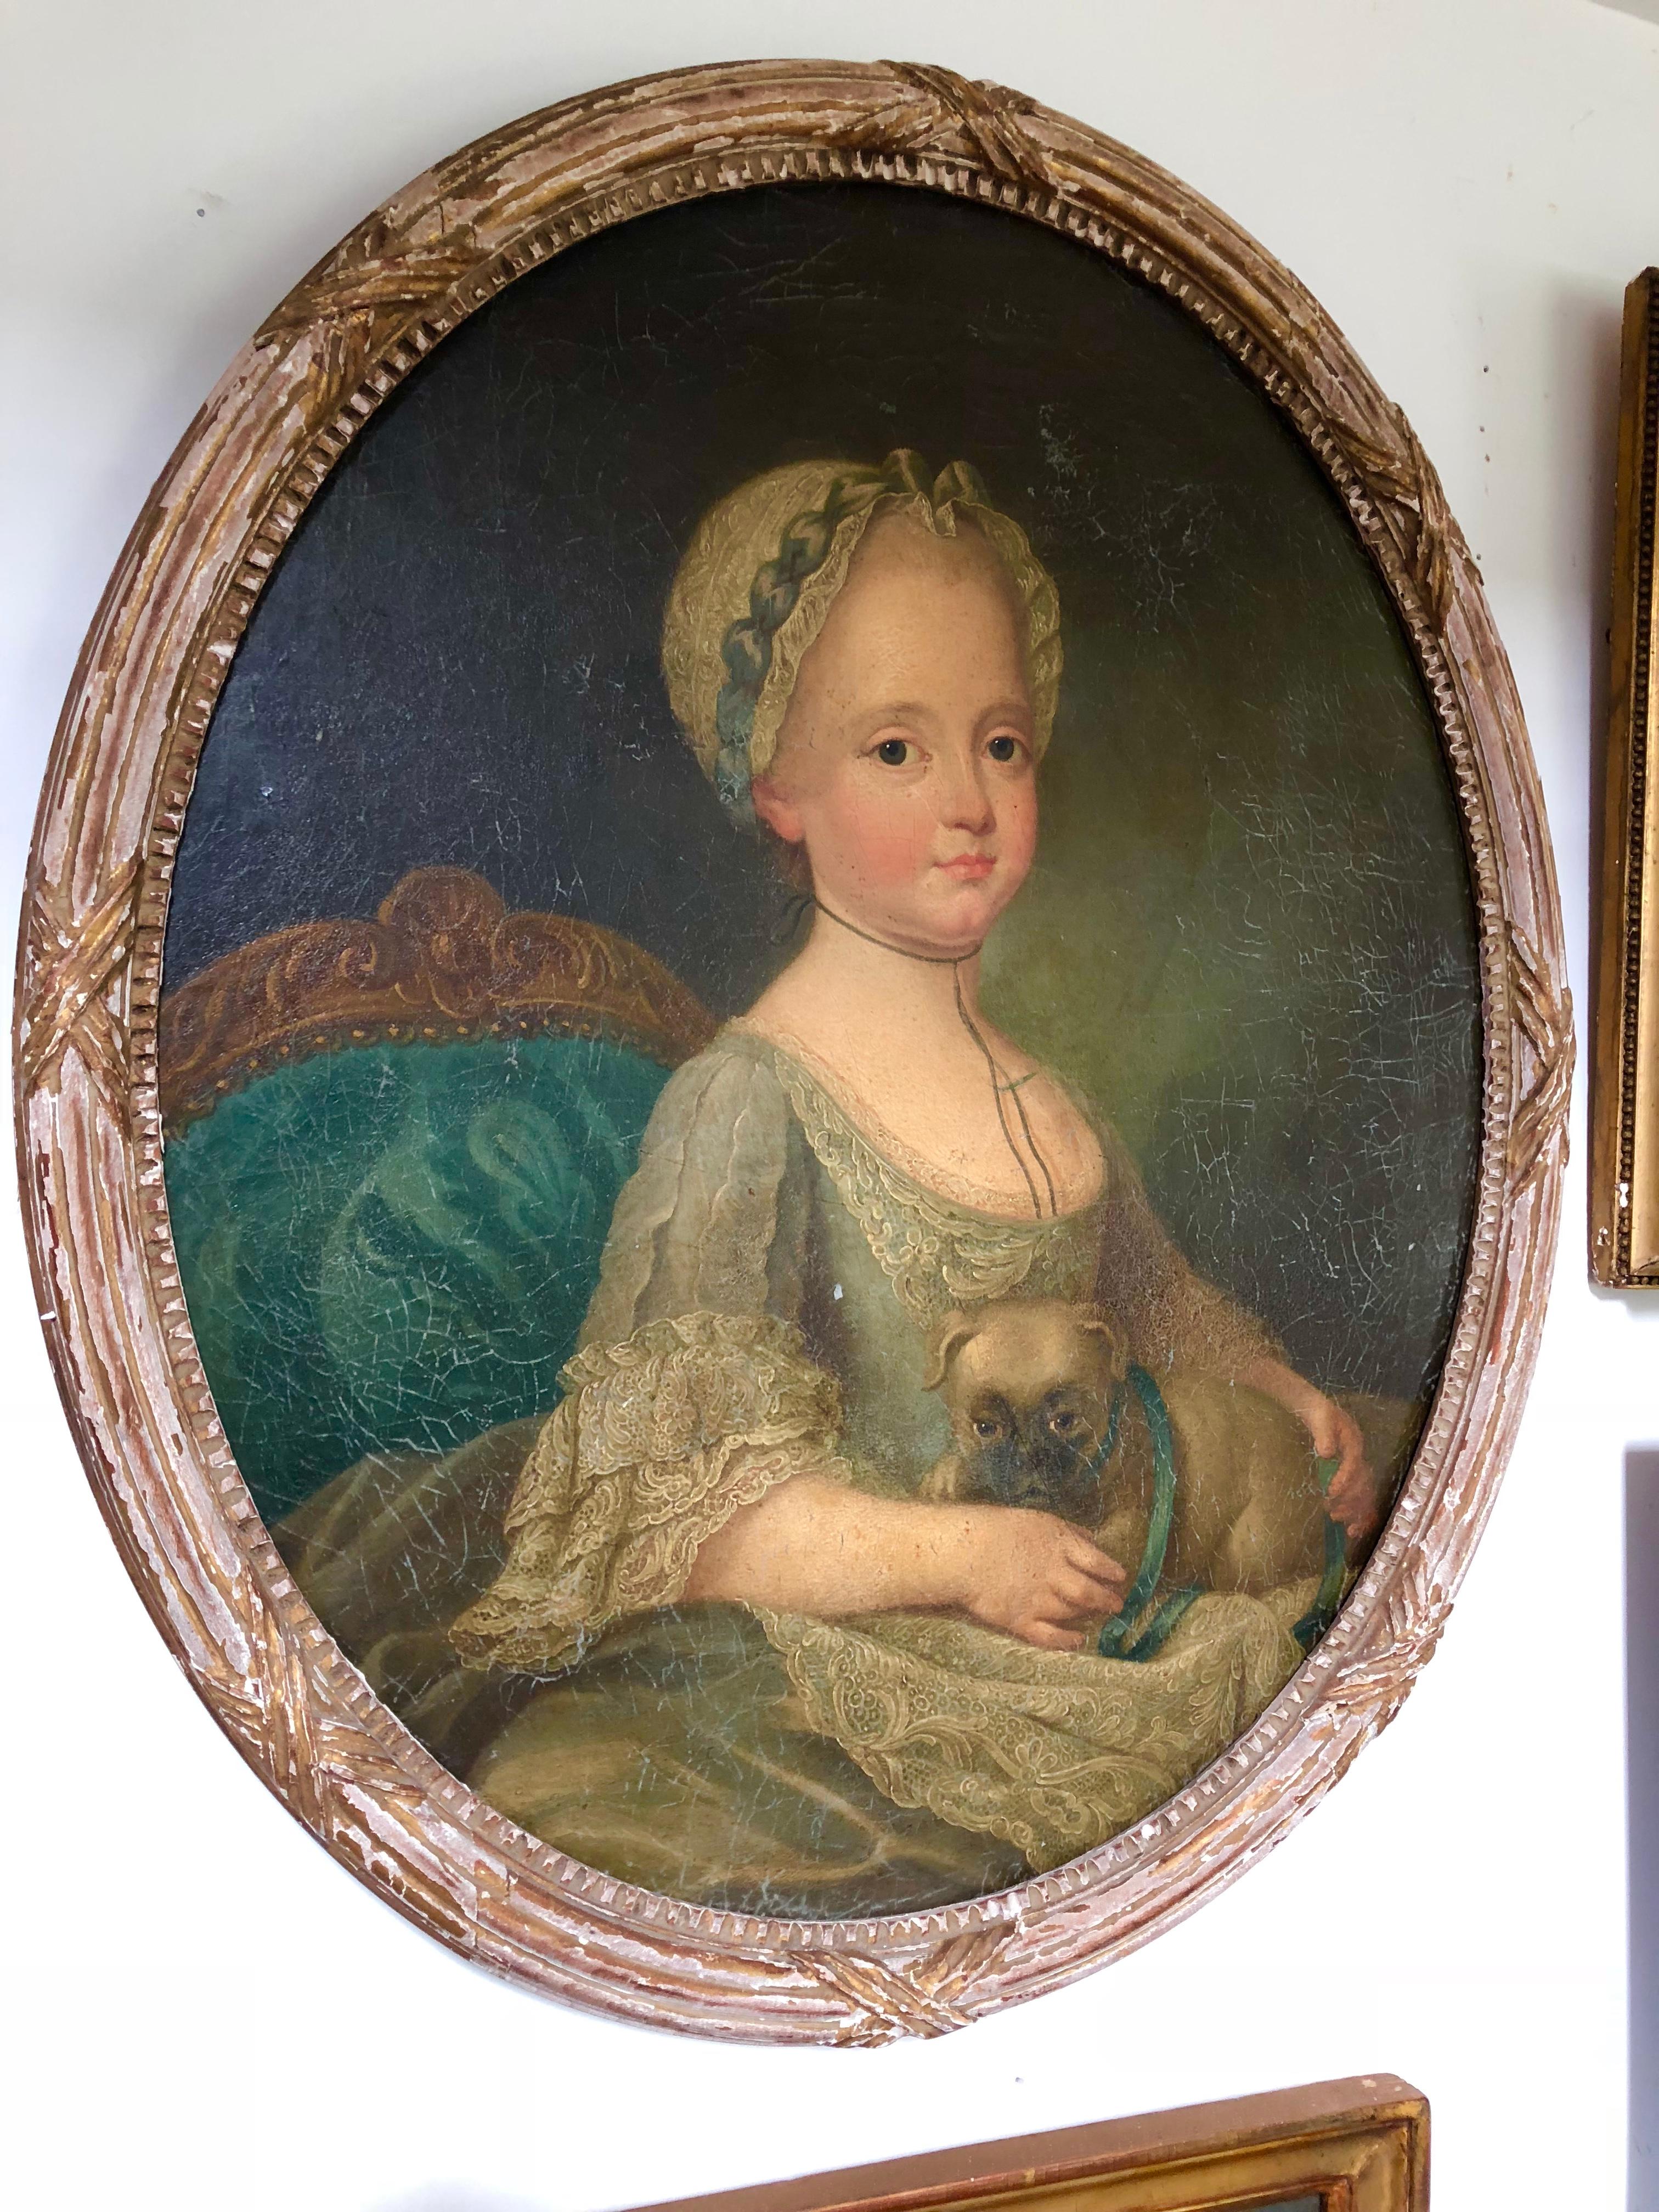 A charming oval portrait of a young girl with her pet pug, oil-on-canvas, late 18th century, French. From the estate of Pierre Moulin founder of Pierre Deux French Country.